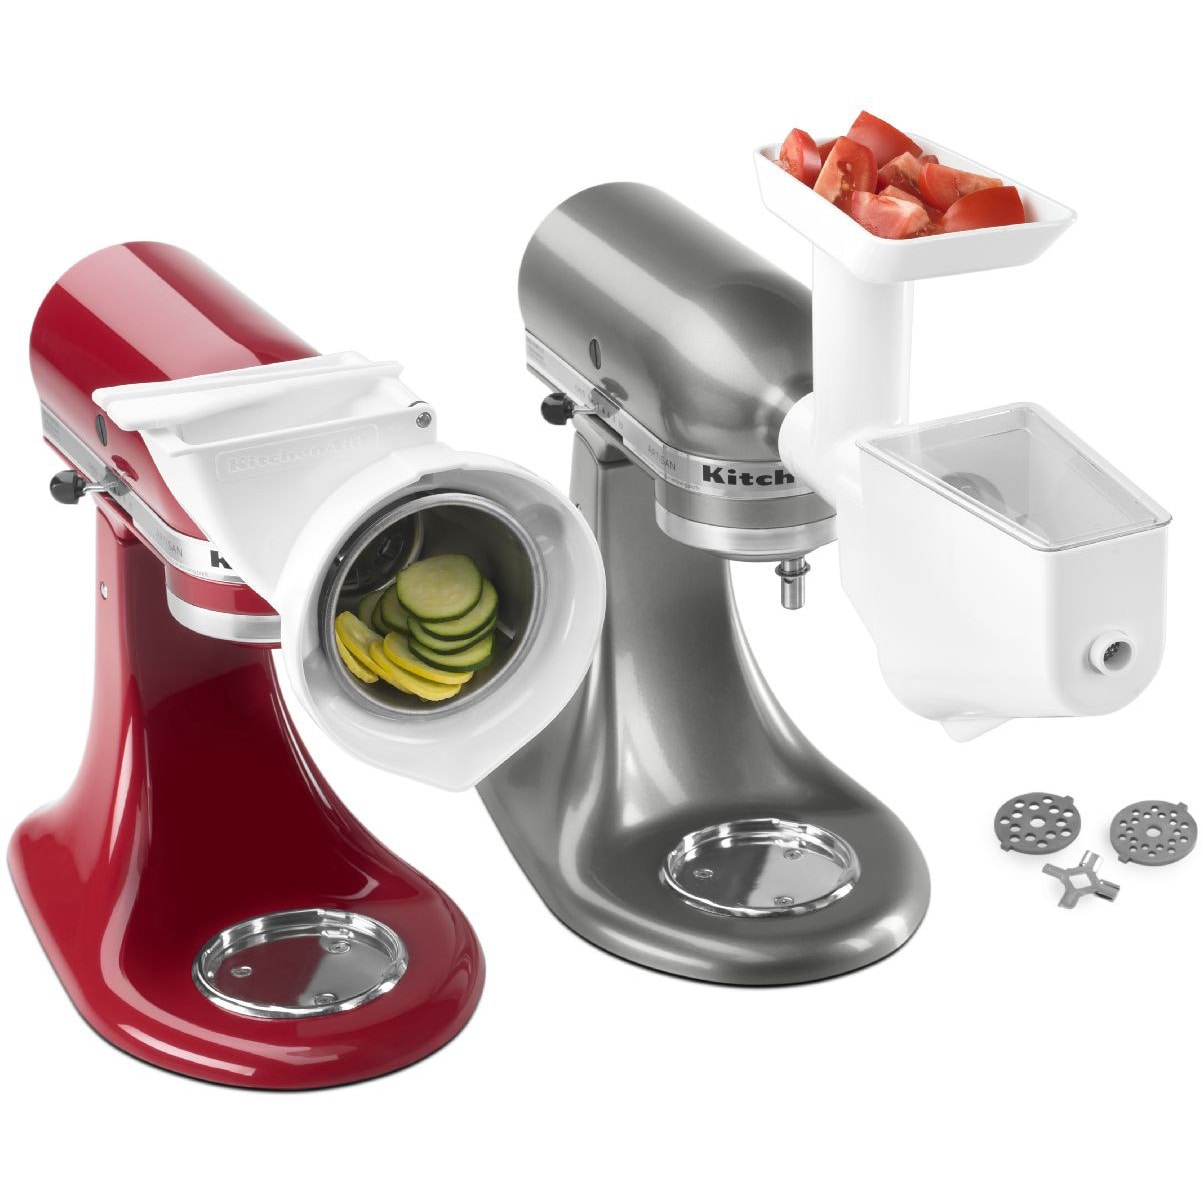 KitchenAid FPPA Mixer Attachment Pack for Stand Mixers - Bed Bath & Beyond  - 4491708